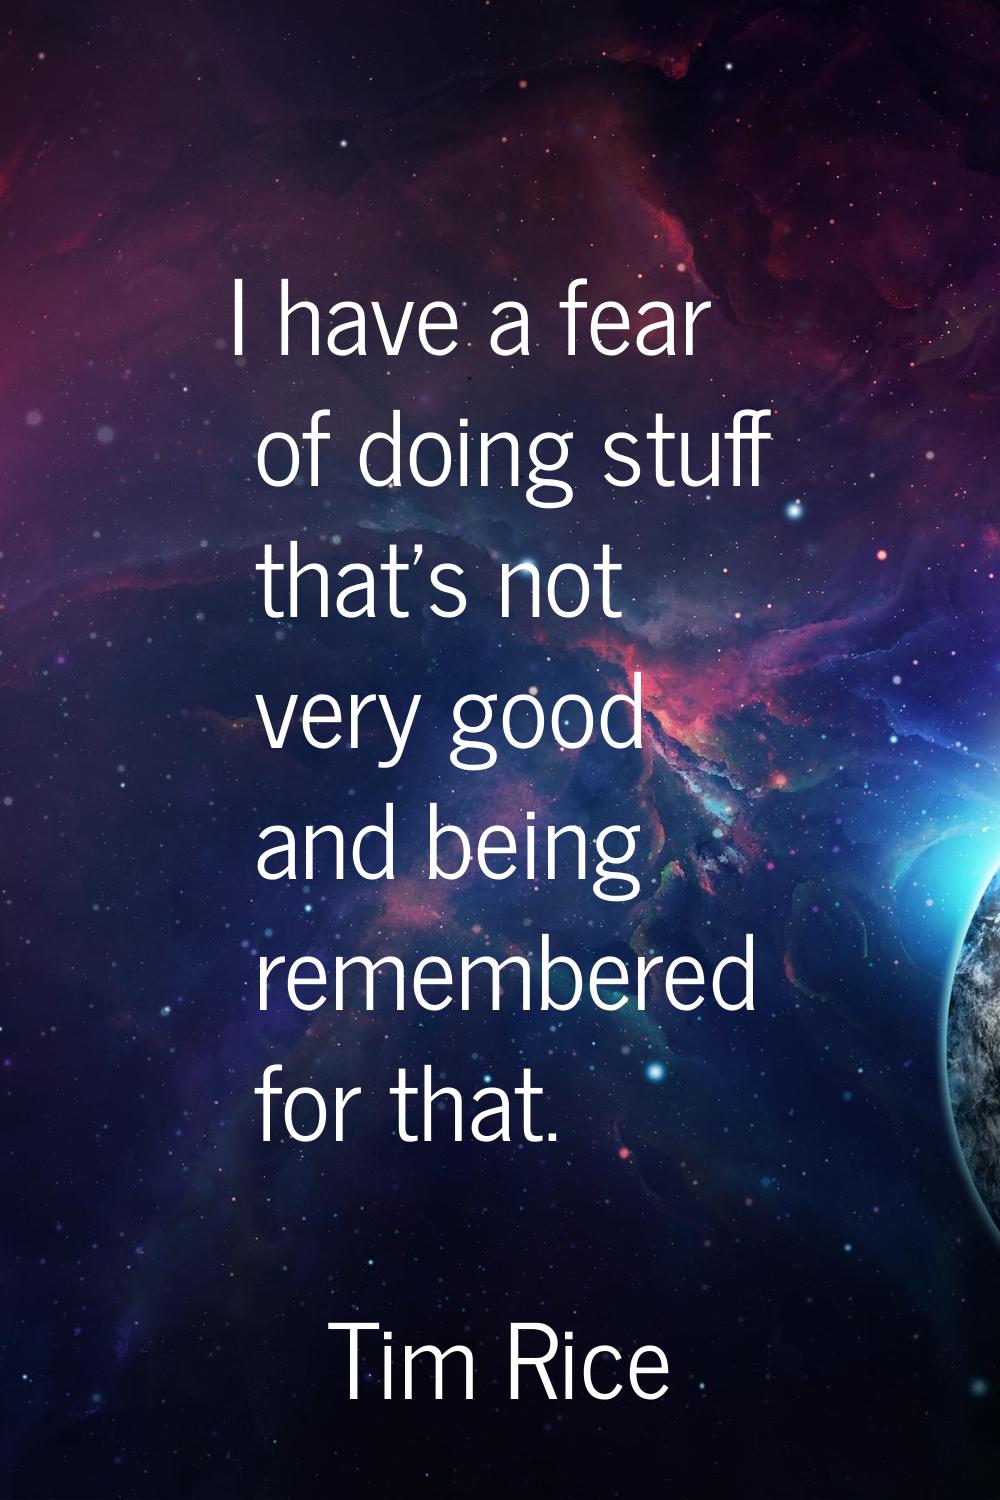 I have a fear of doing stuff that's not very good and being remembered for that.